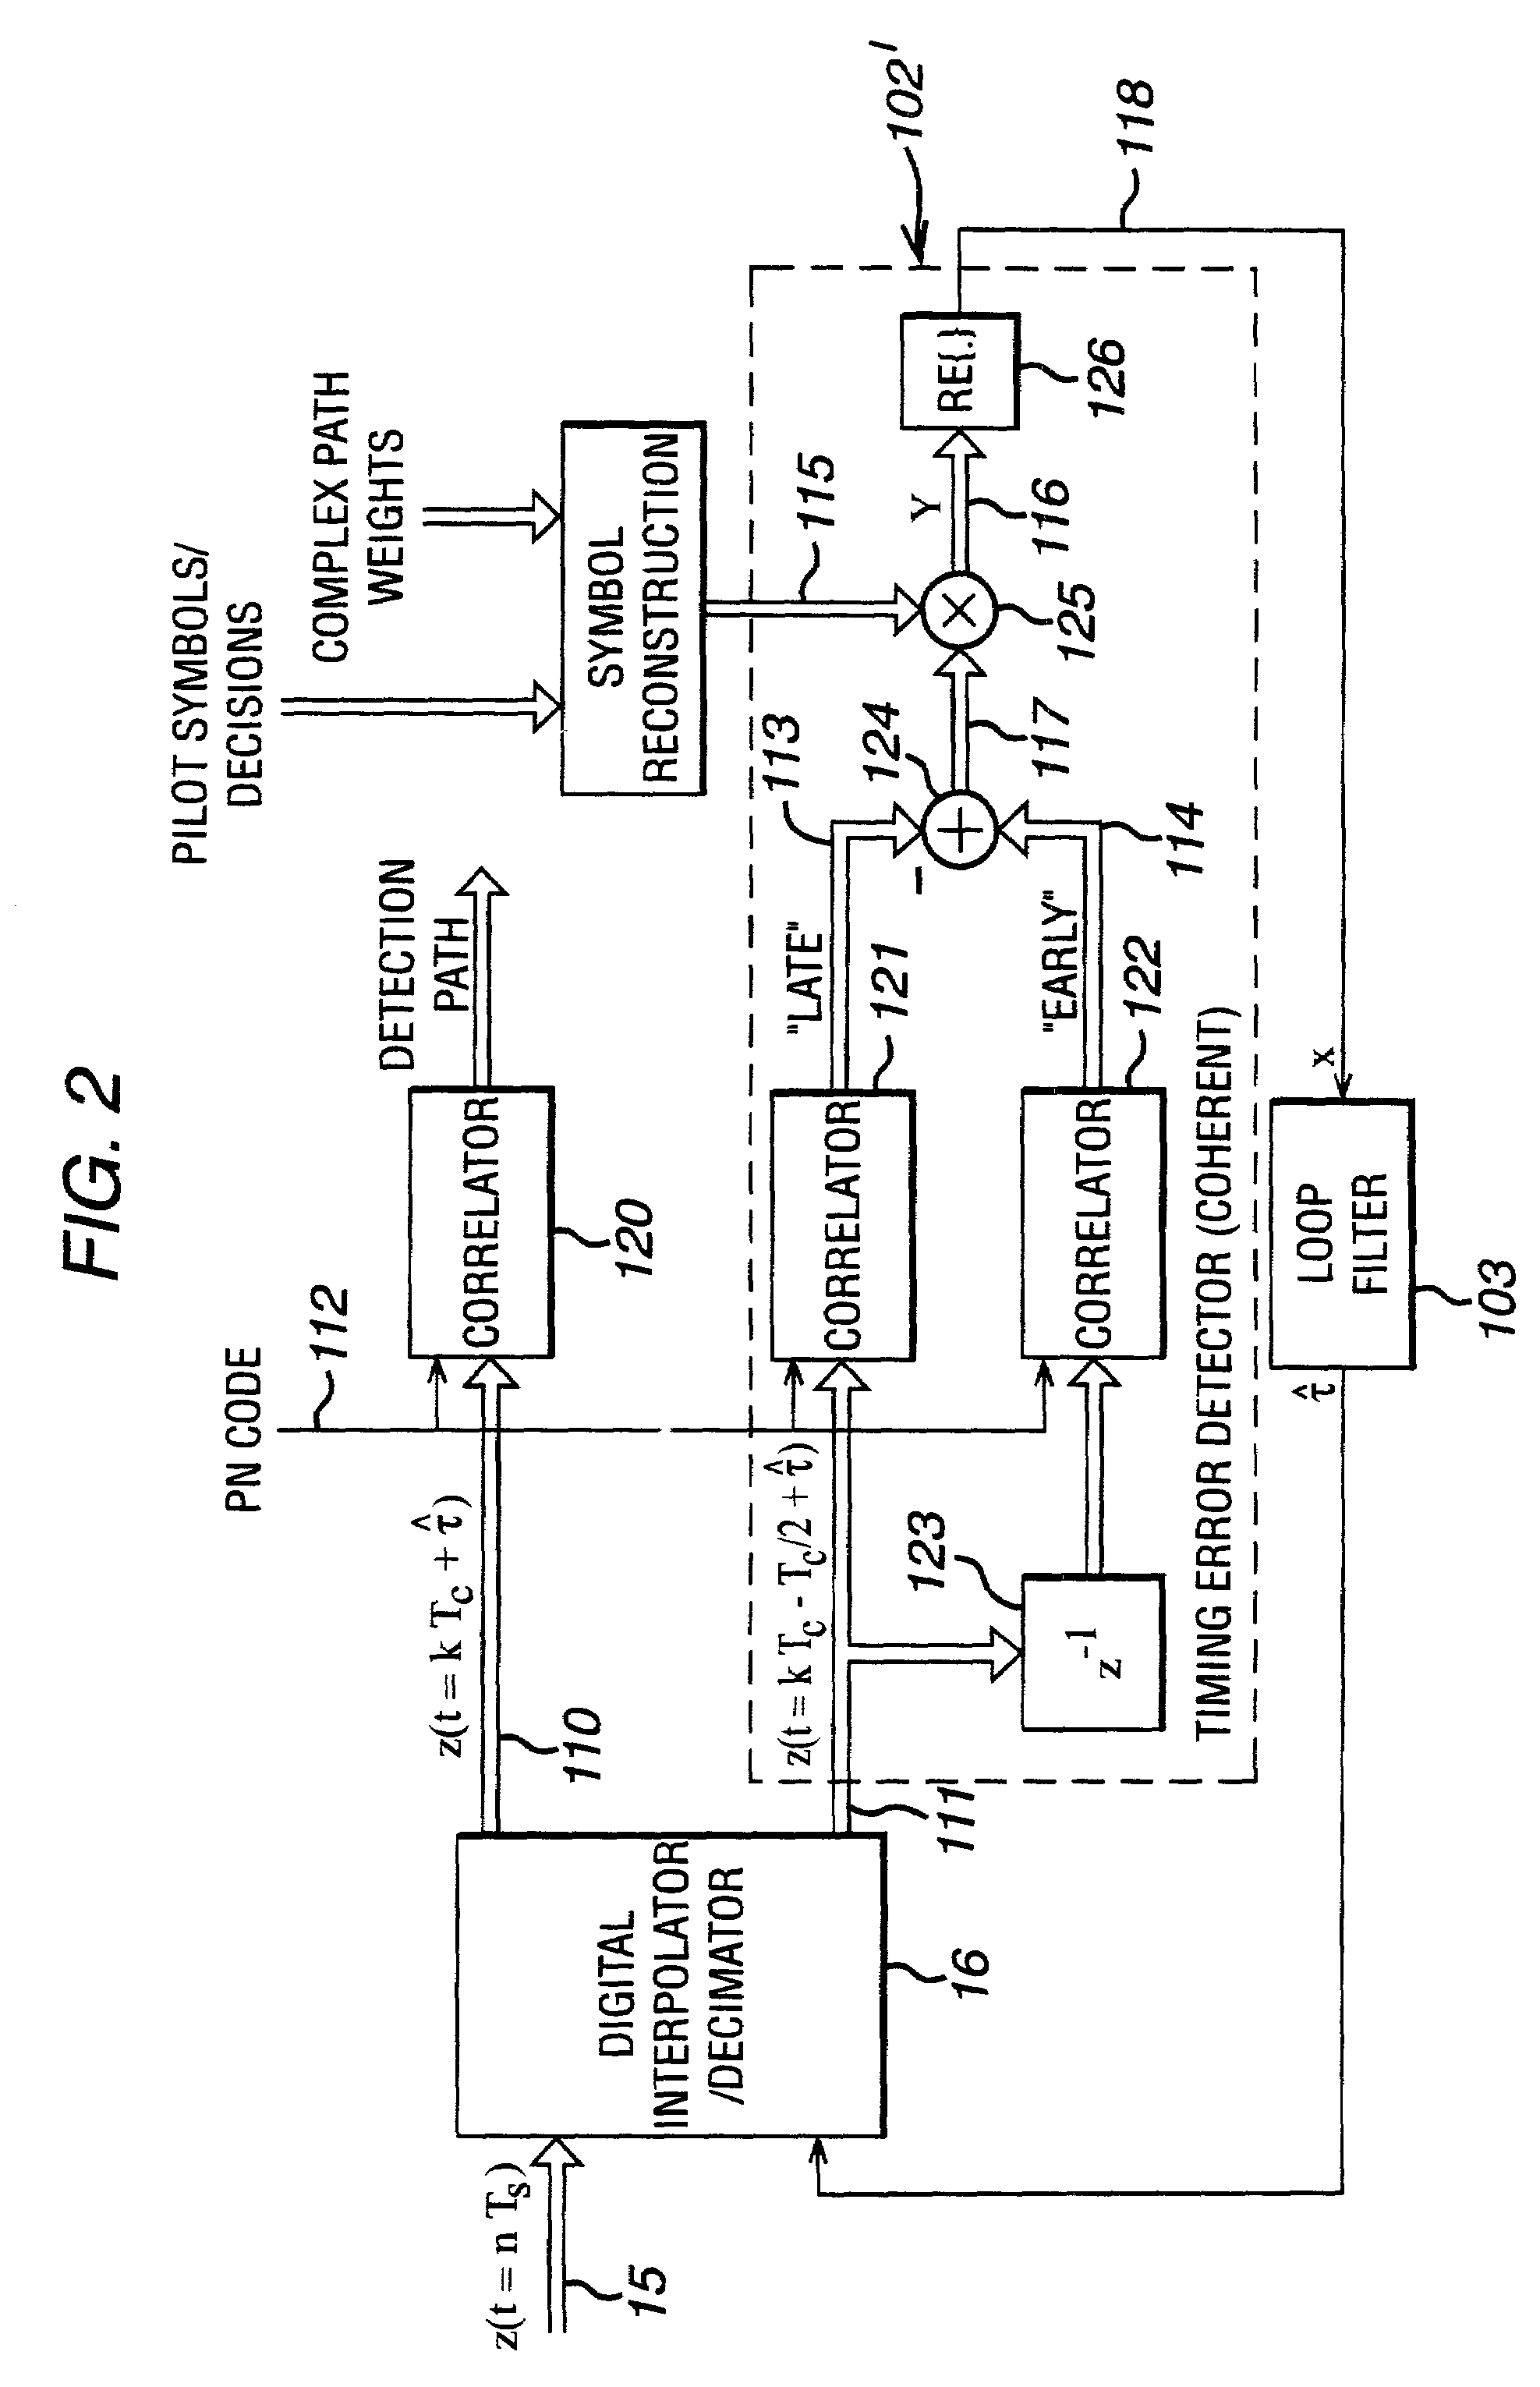 Method and rake receiver for code-tracking in communication systems